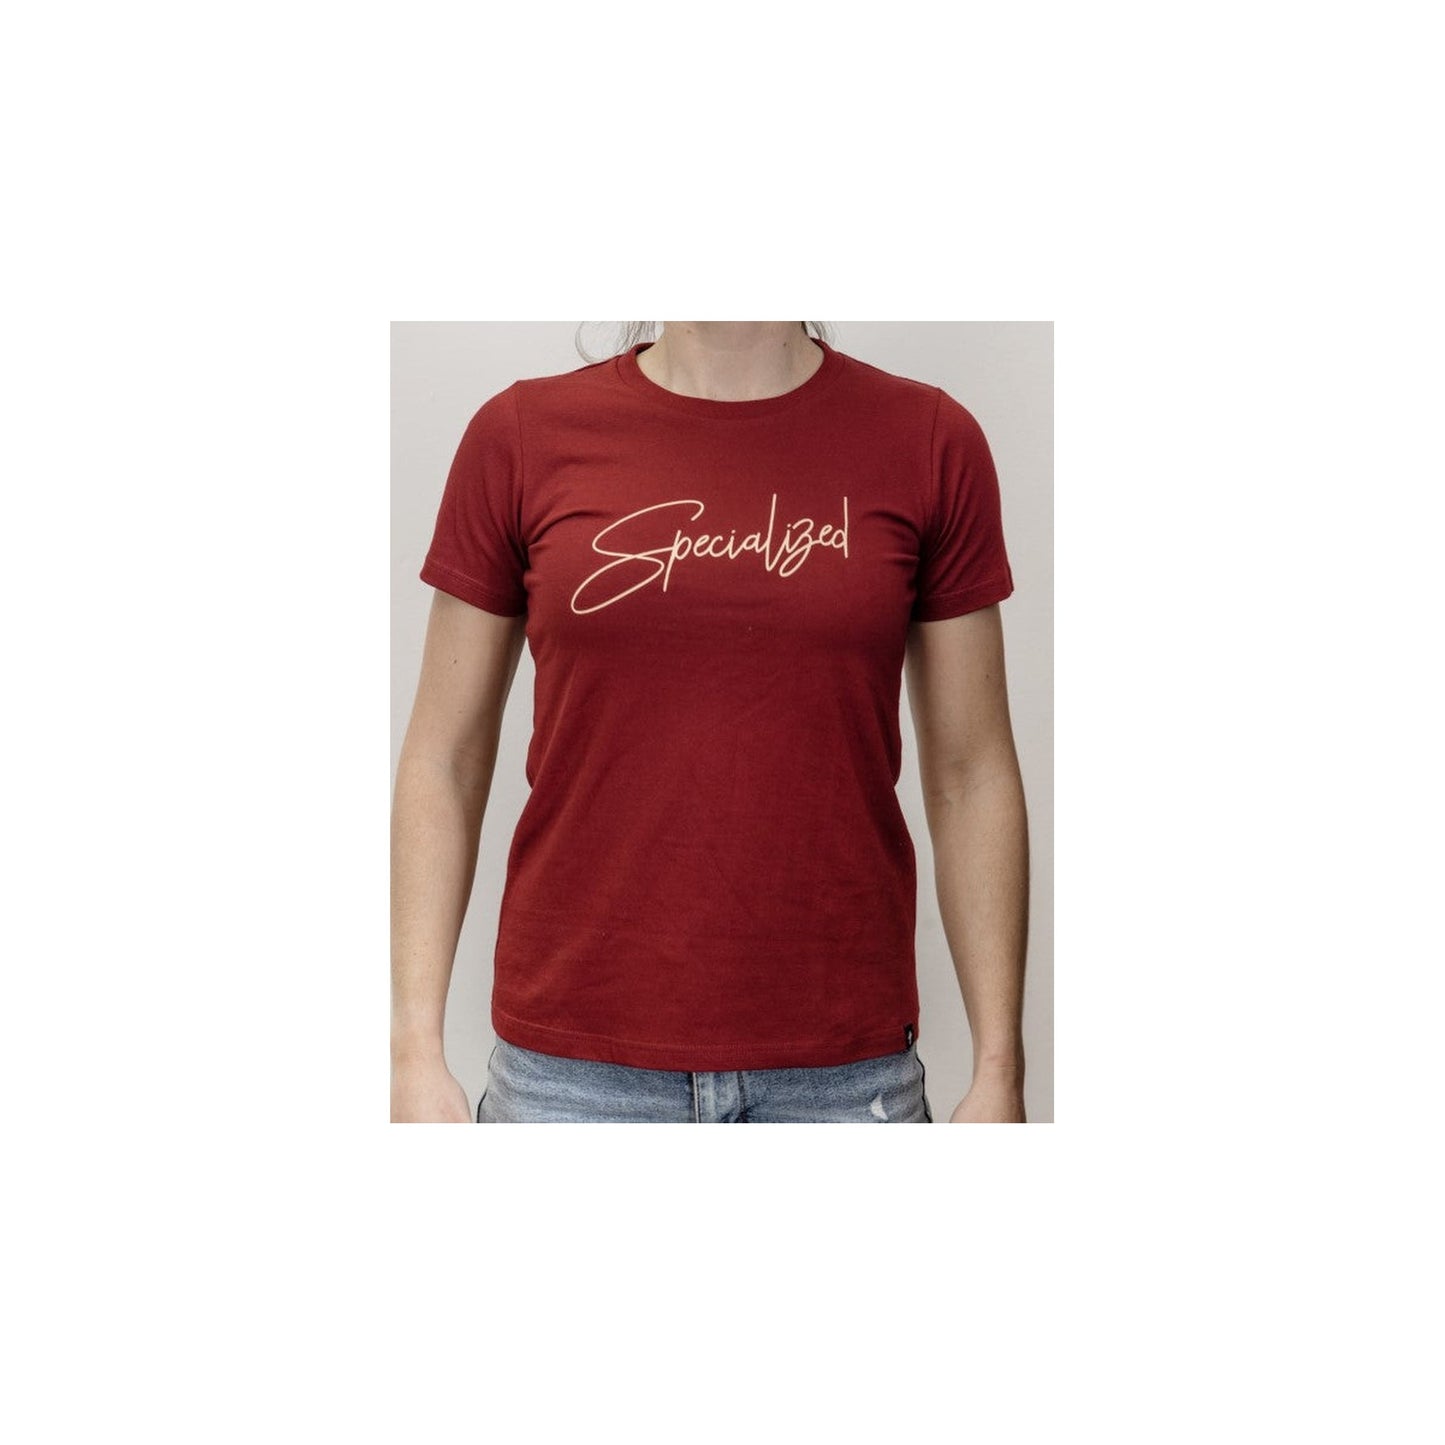 Specialized Cursive Tee Women | completecyclist - 